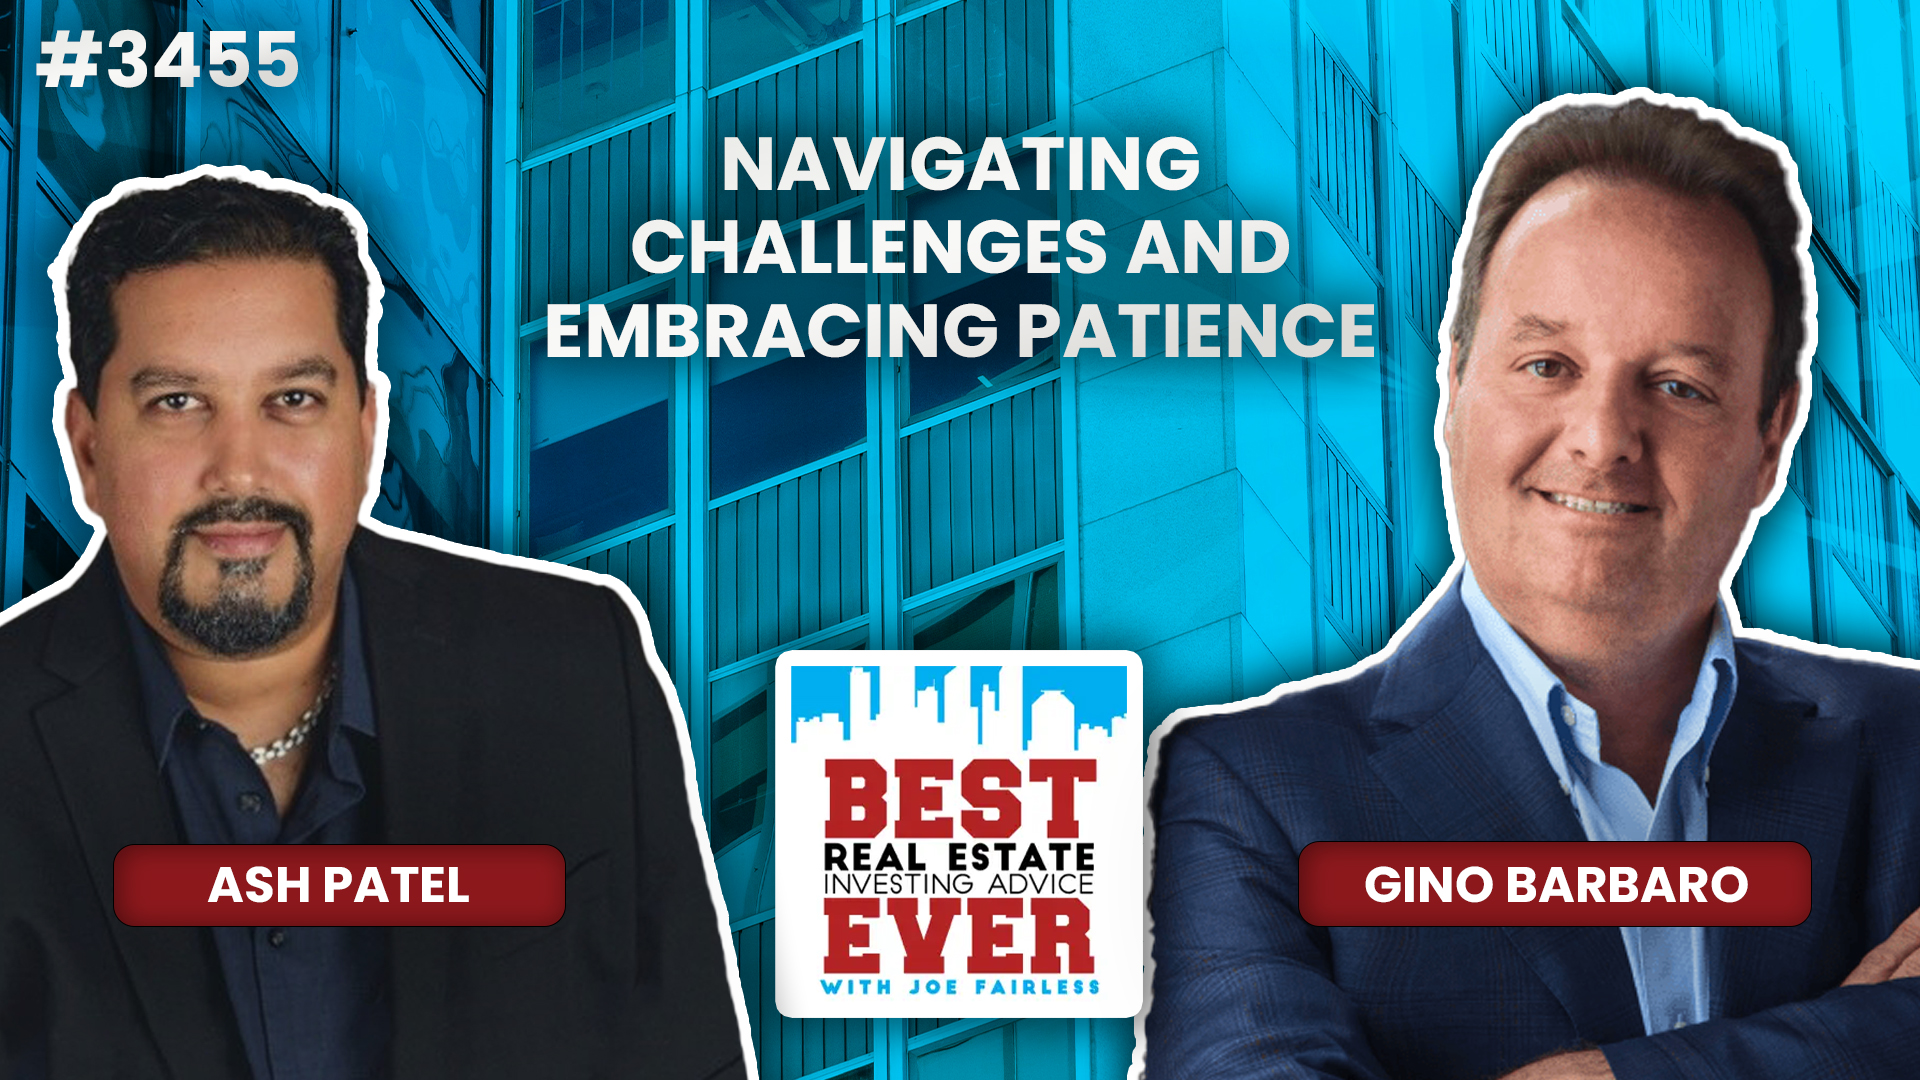 JF3455: Navigating Challenges and Embracing Patience ft. Gino Barbaro